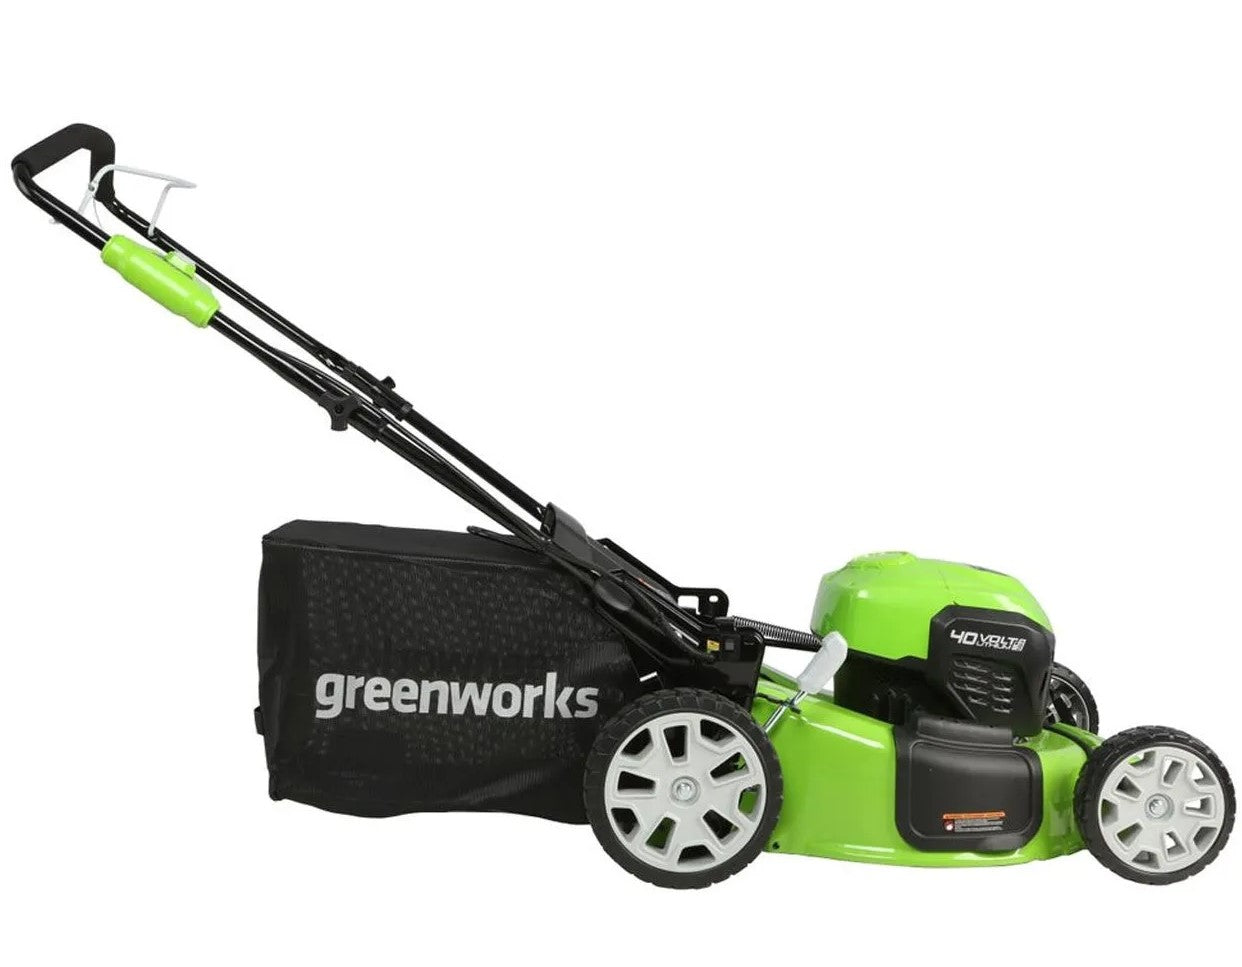 Greenworks GW2527302AZ 40V 21" Brushless Lawn Mower, 4Ah and 2Ah USB Batteries and Charger Included MO40L4210